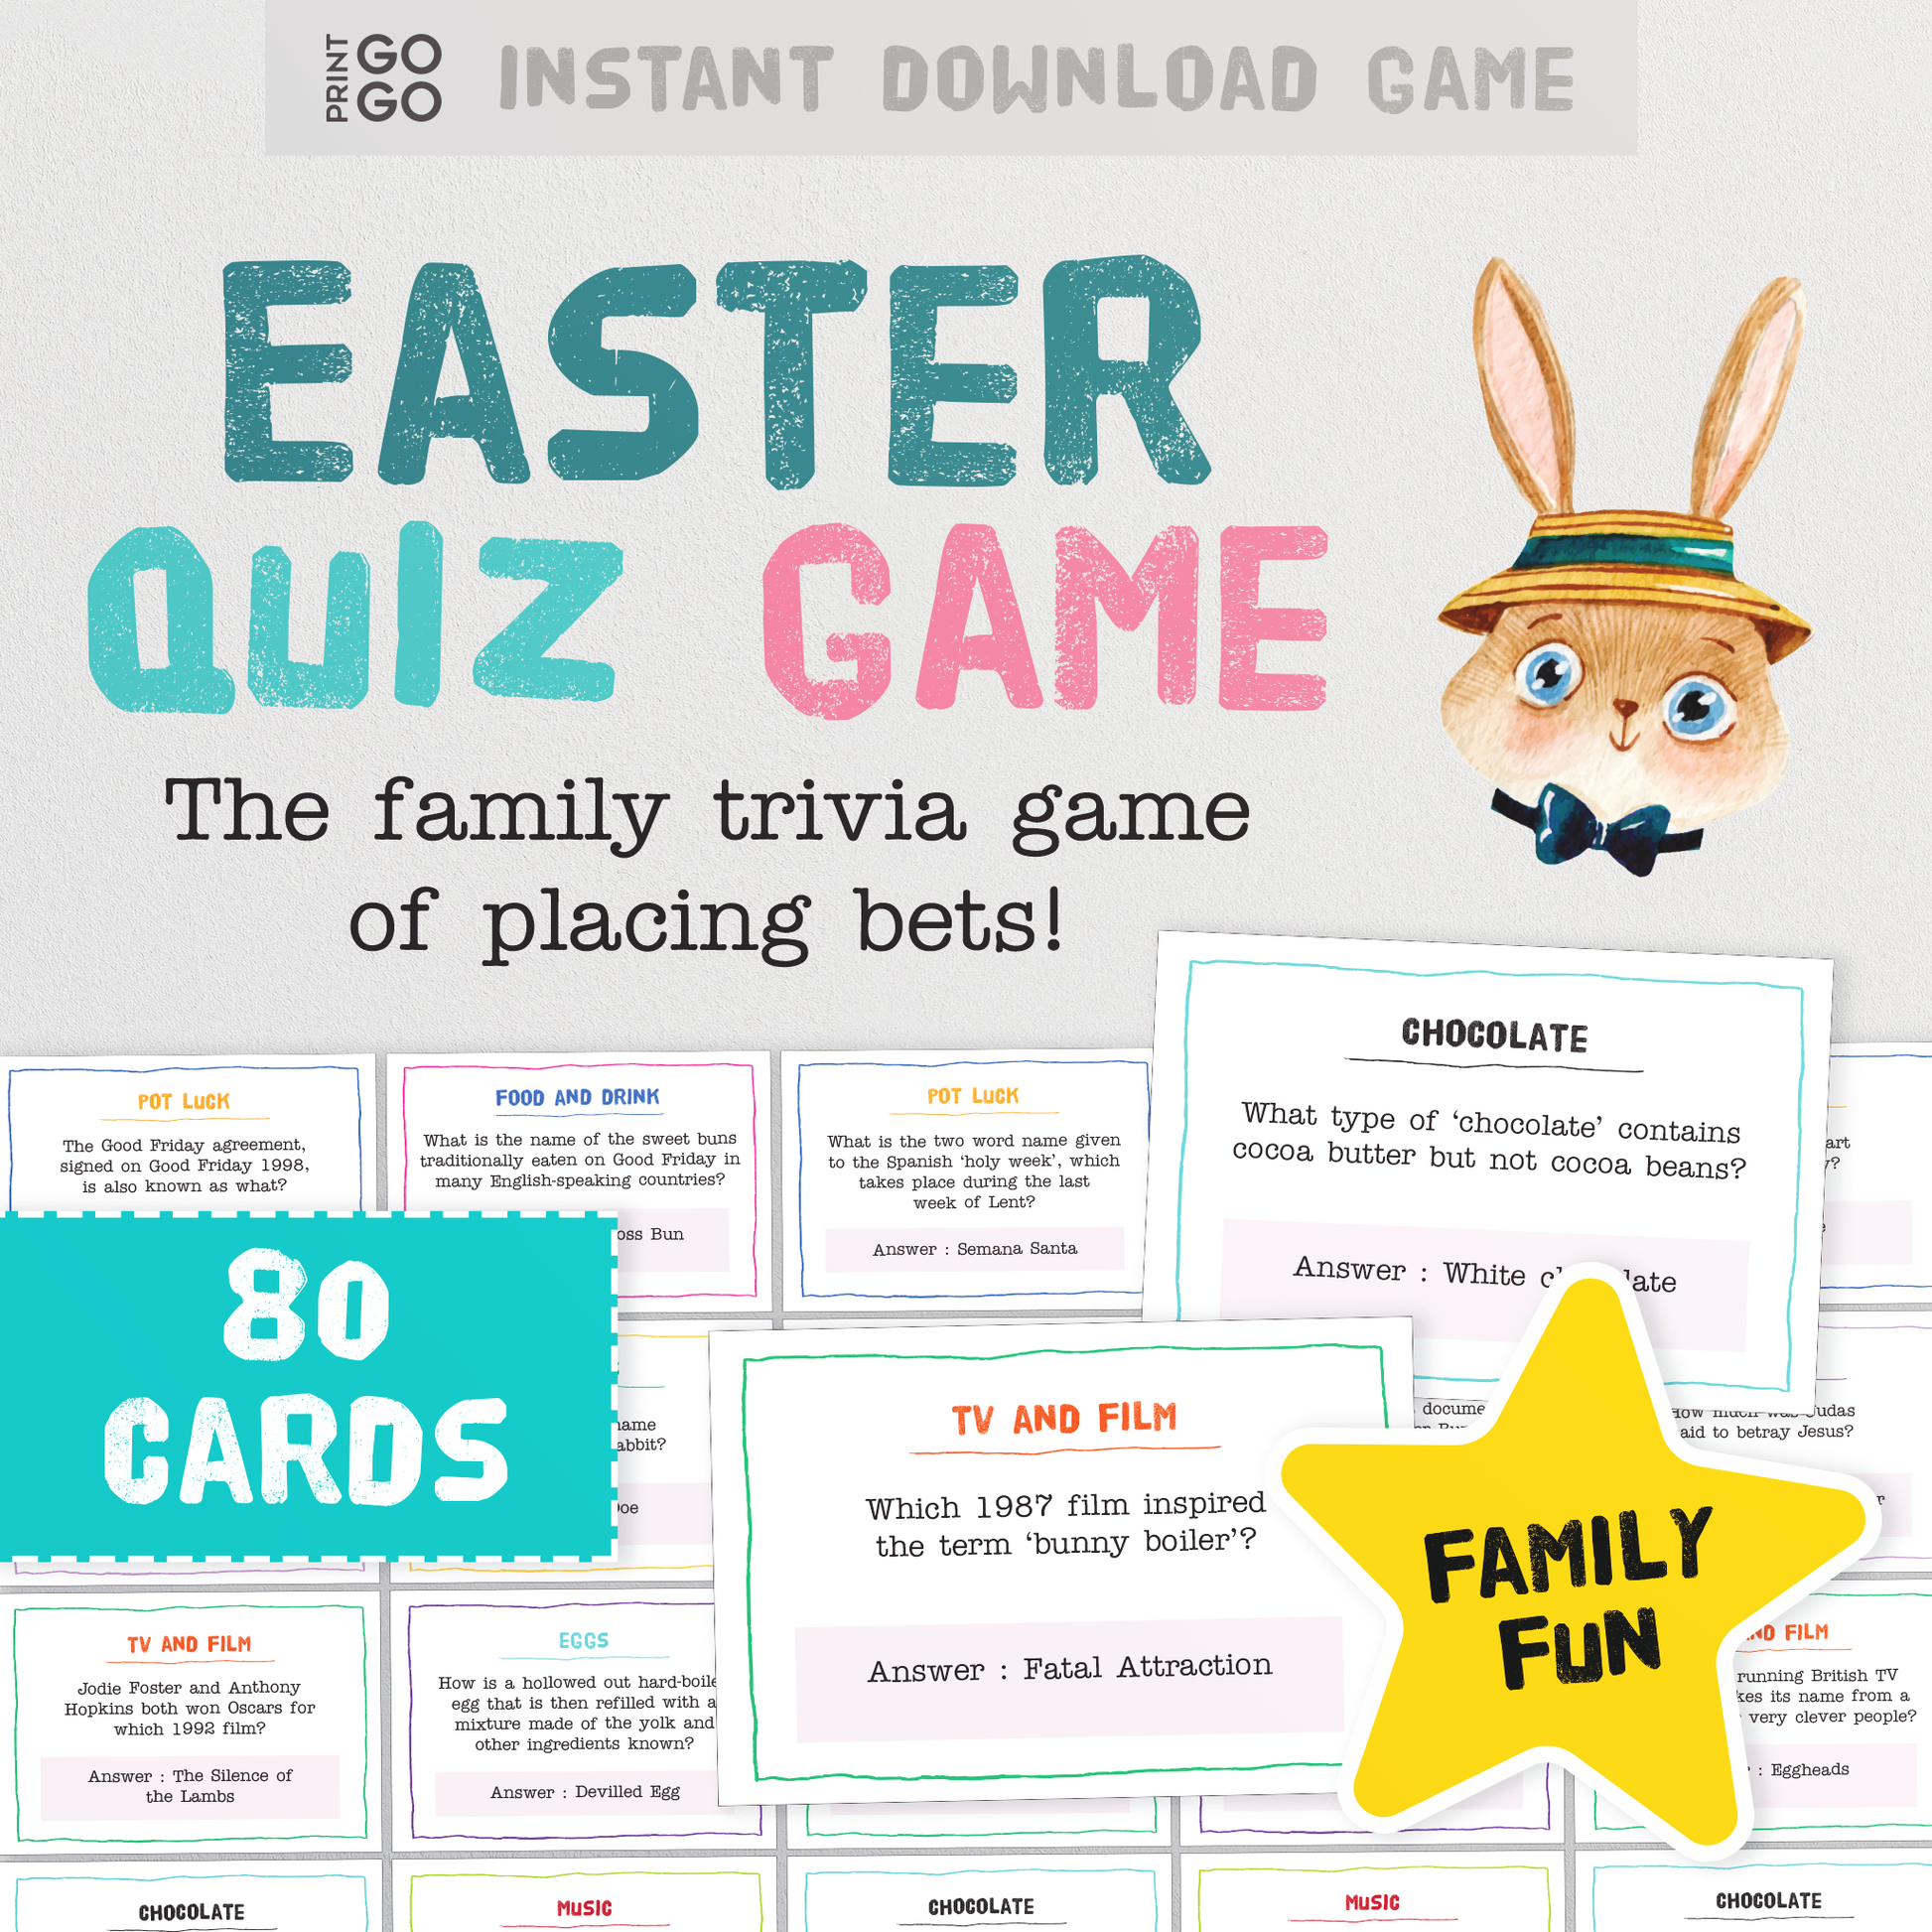 Easter Quiz Game - The Fun Trivia Party Game of Placing Bets